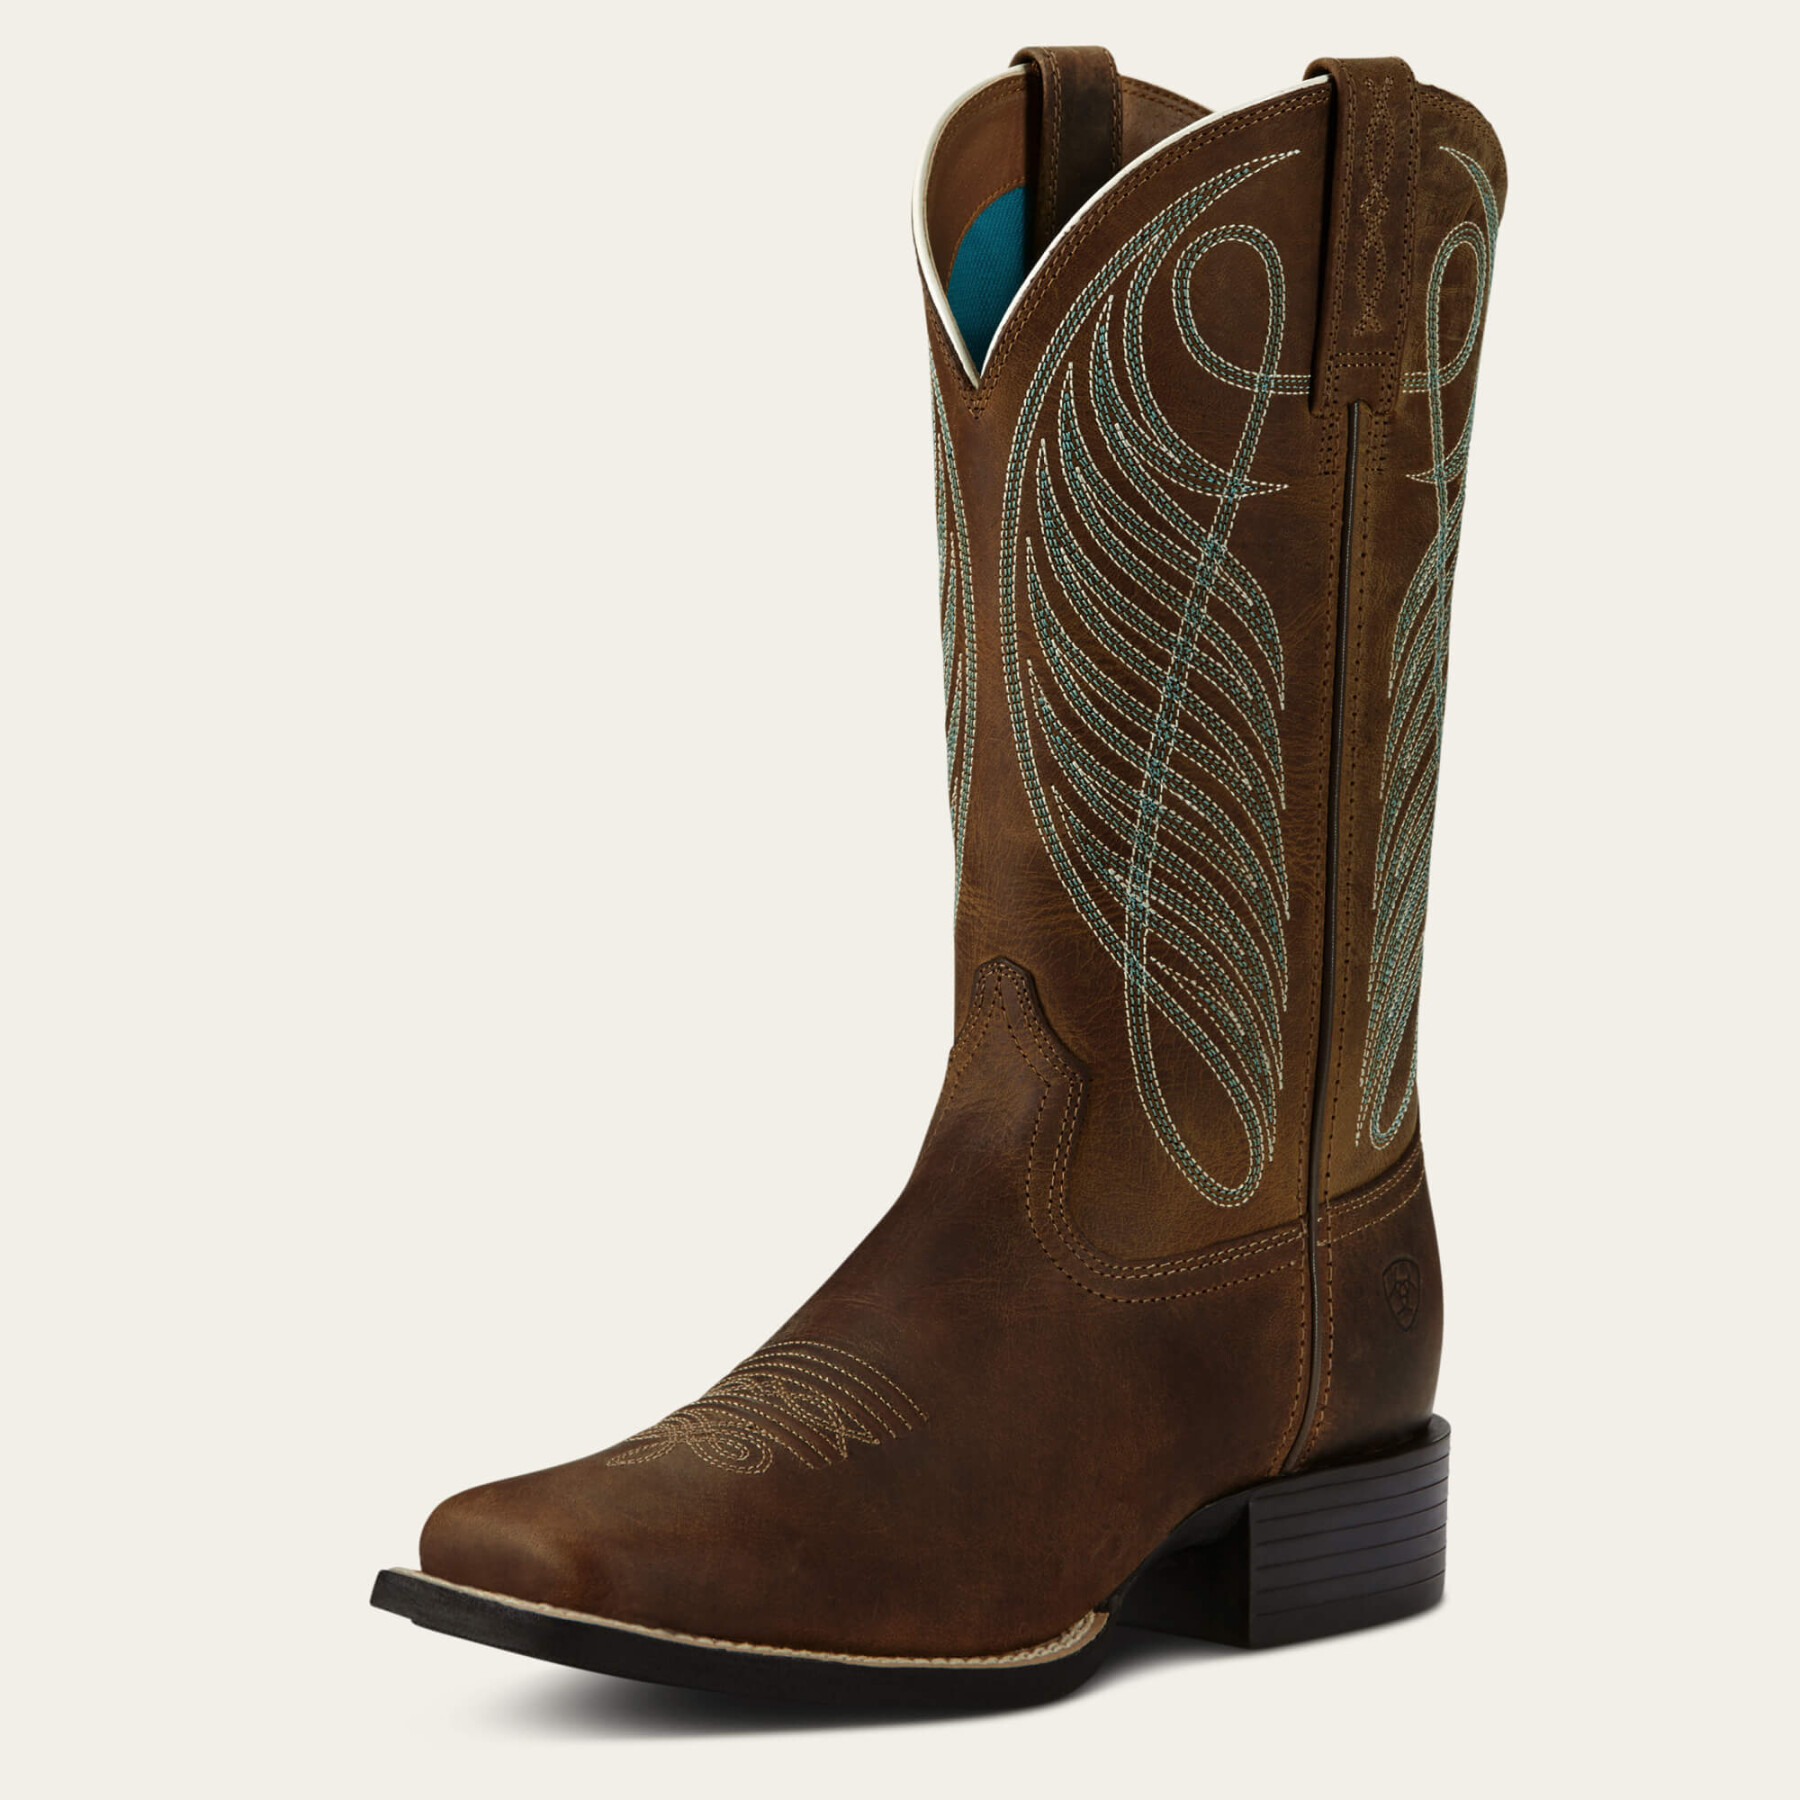 Women's leather western boots Ariat Round Up WST